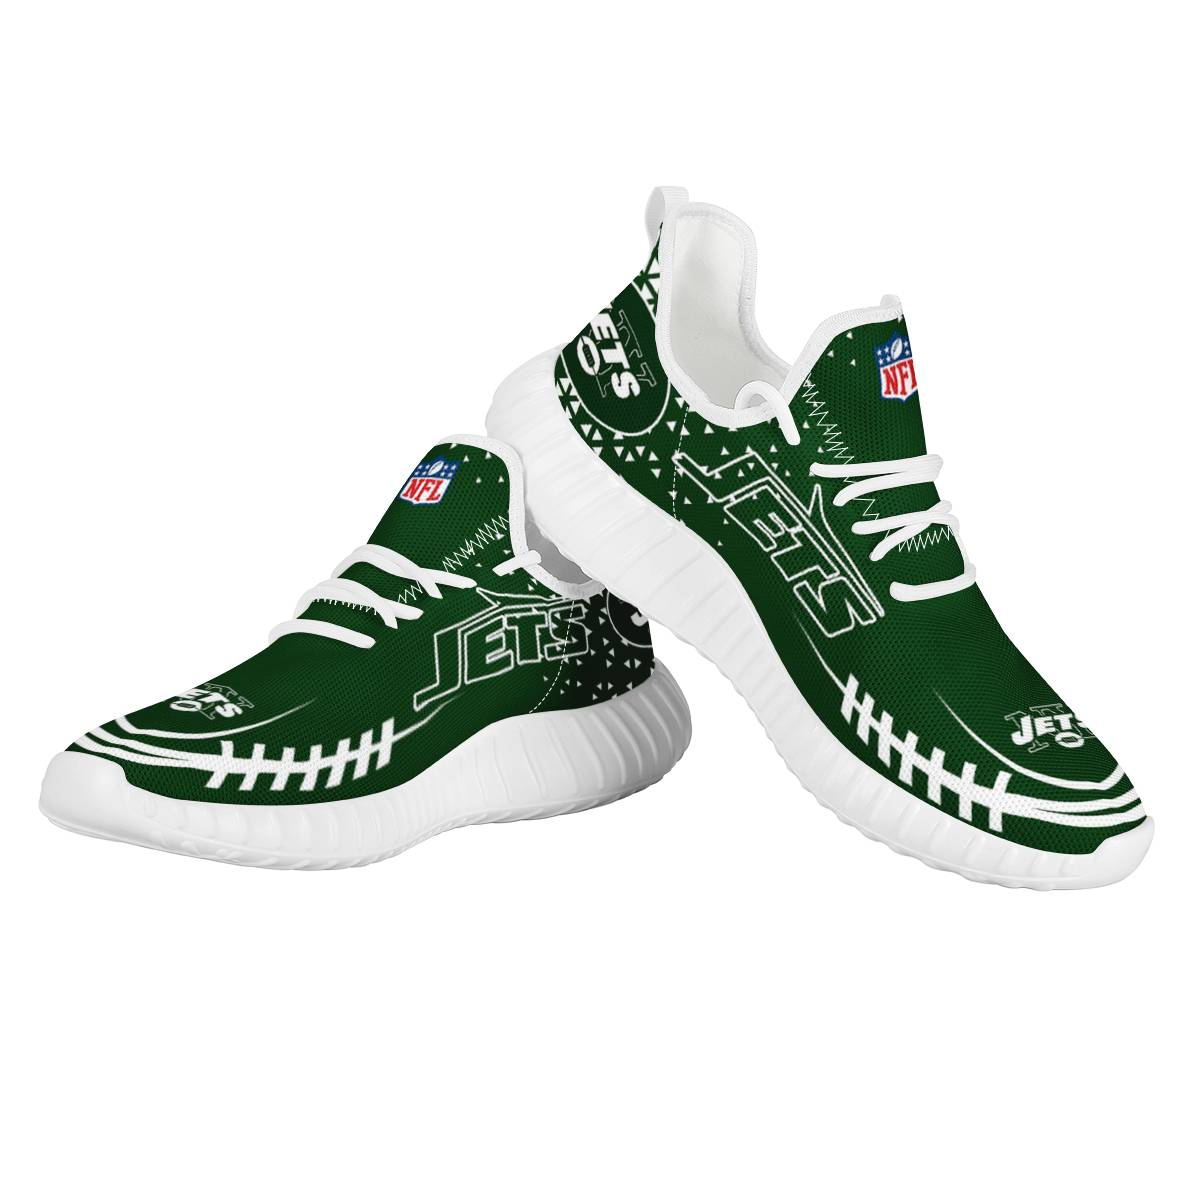 Men's NFL New York Jets Mesh Knit Sneakers/Shoes 005